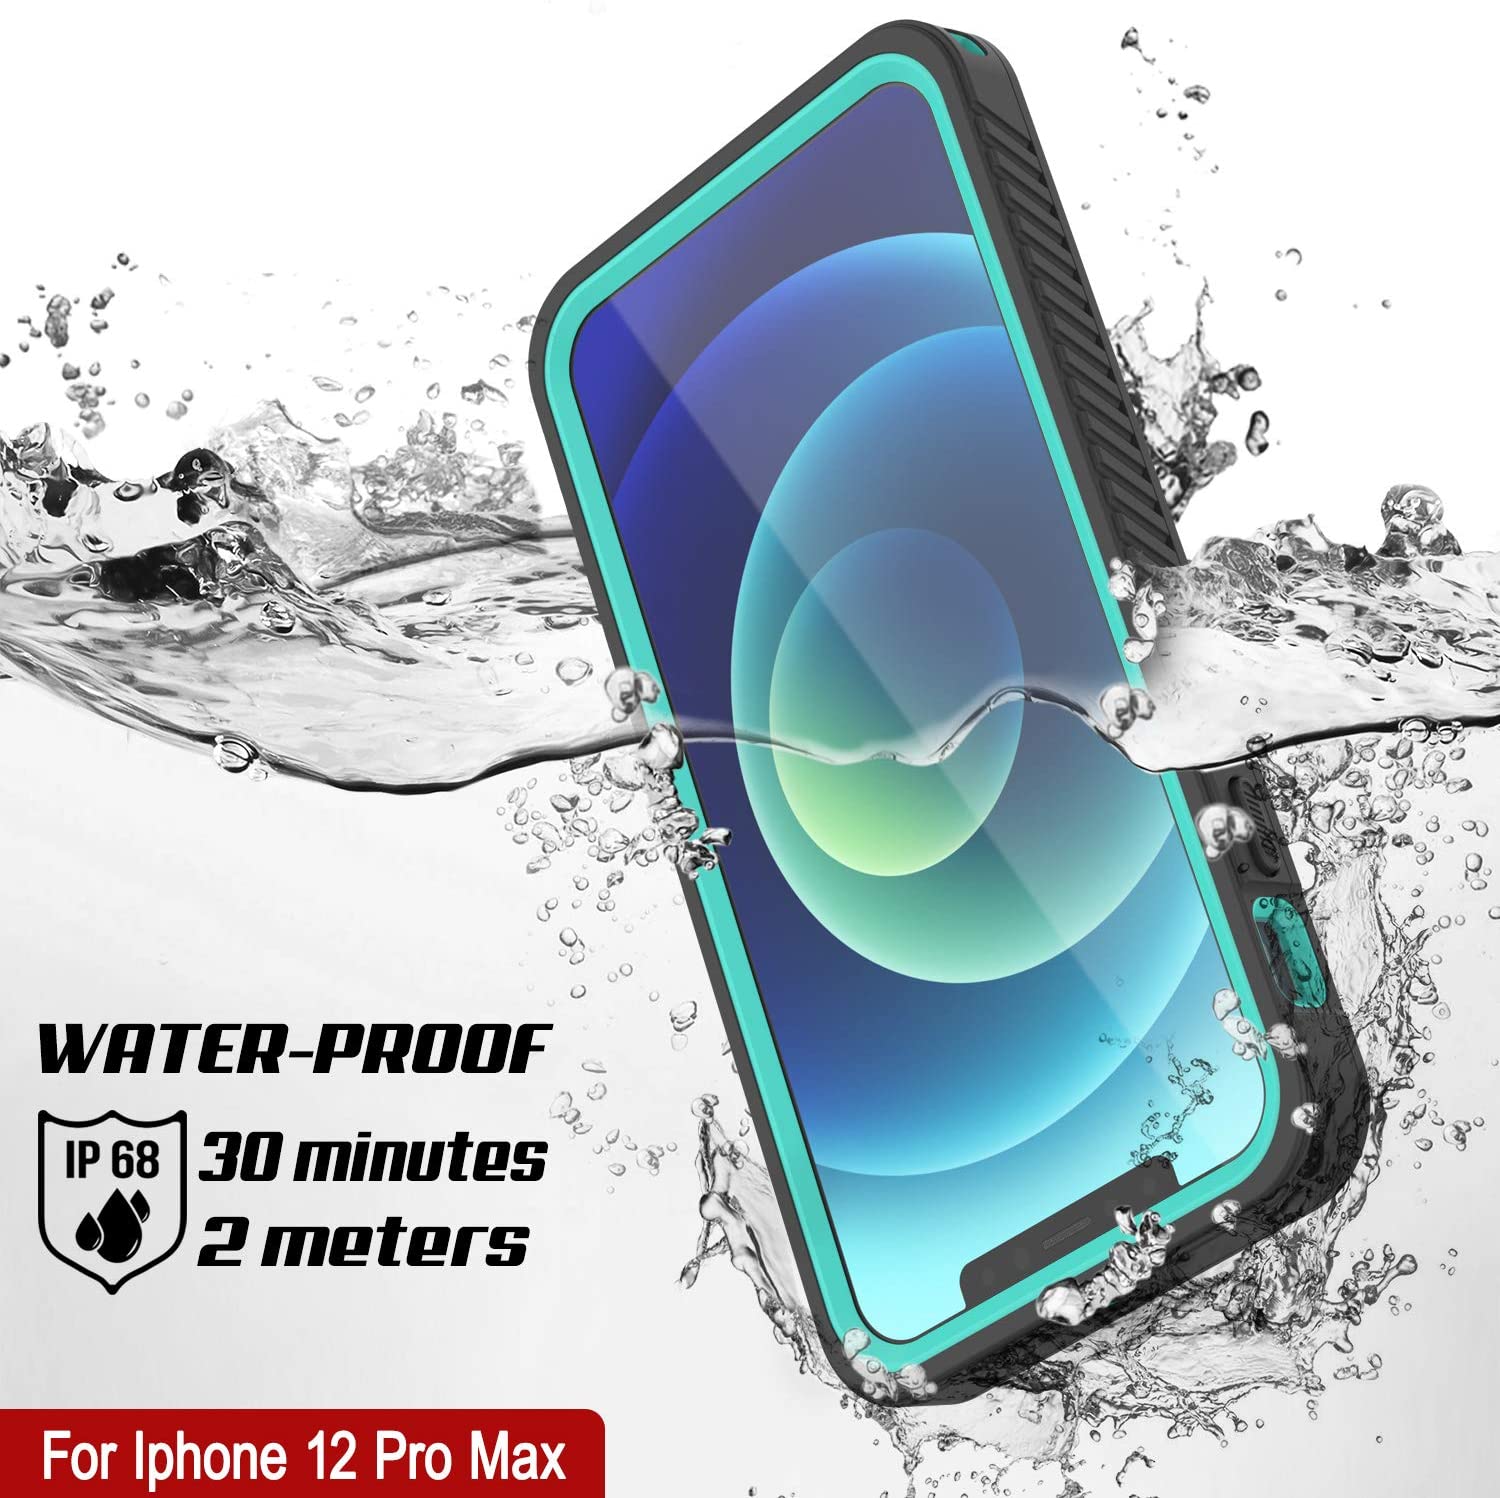 iPhone 12 Pro Max Waterproof Case, Punkcase [Extreme Series] Armor Cover W/ Built In Screen Protector [Teal]